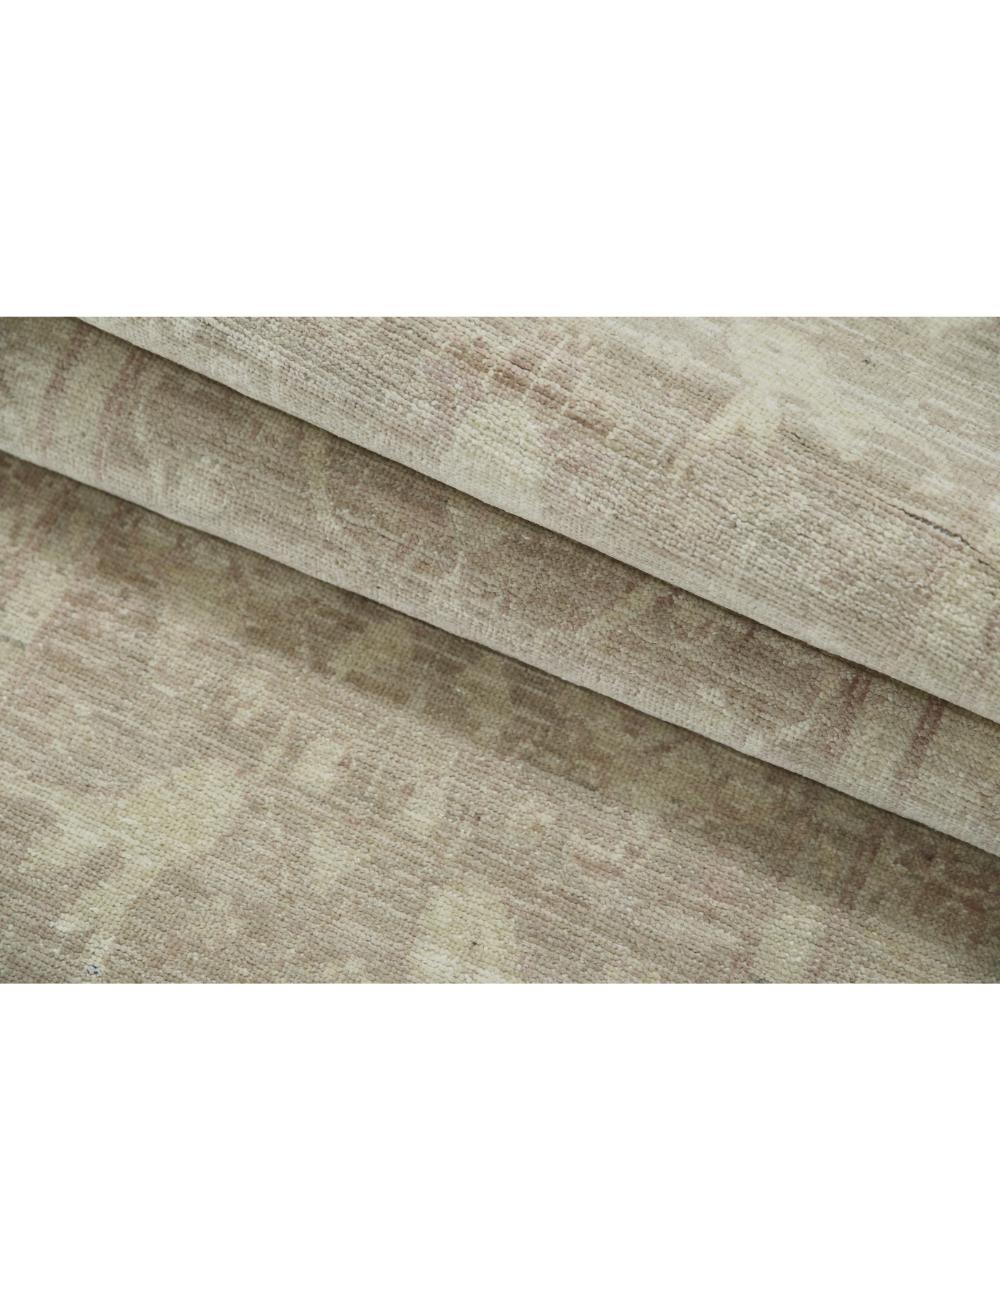 Serenity 2' 4" X 9' 7" Hand-Knotted Wool Rug 2' 4" X 9' 7" (71 X 292) / Taupe / Ivory